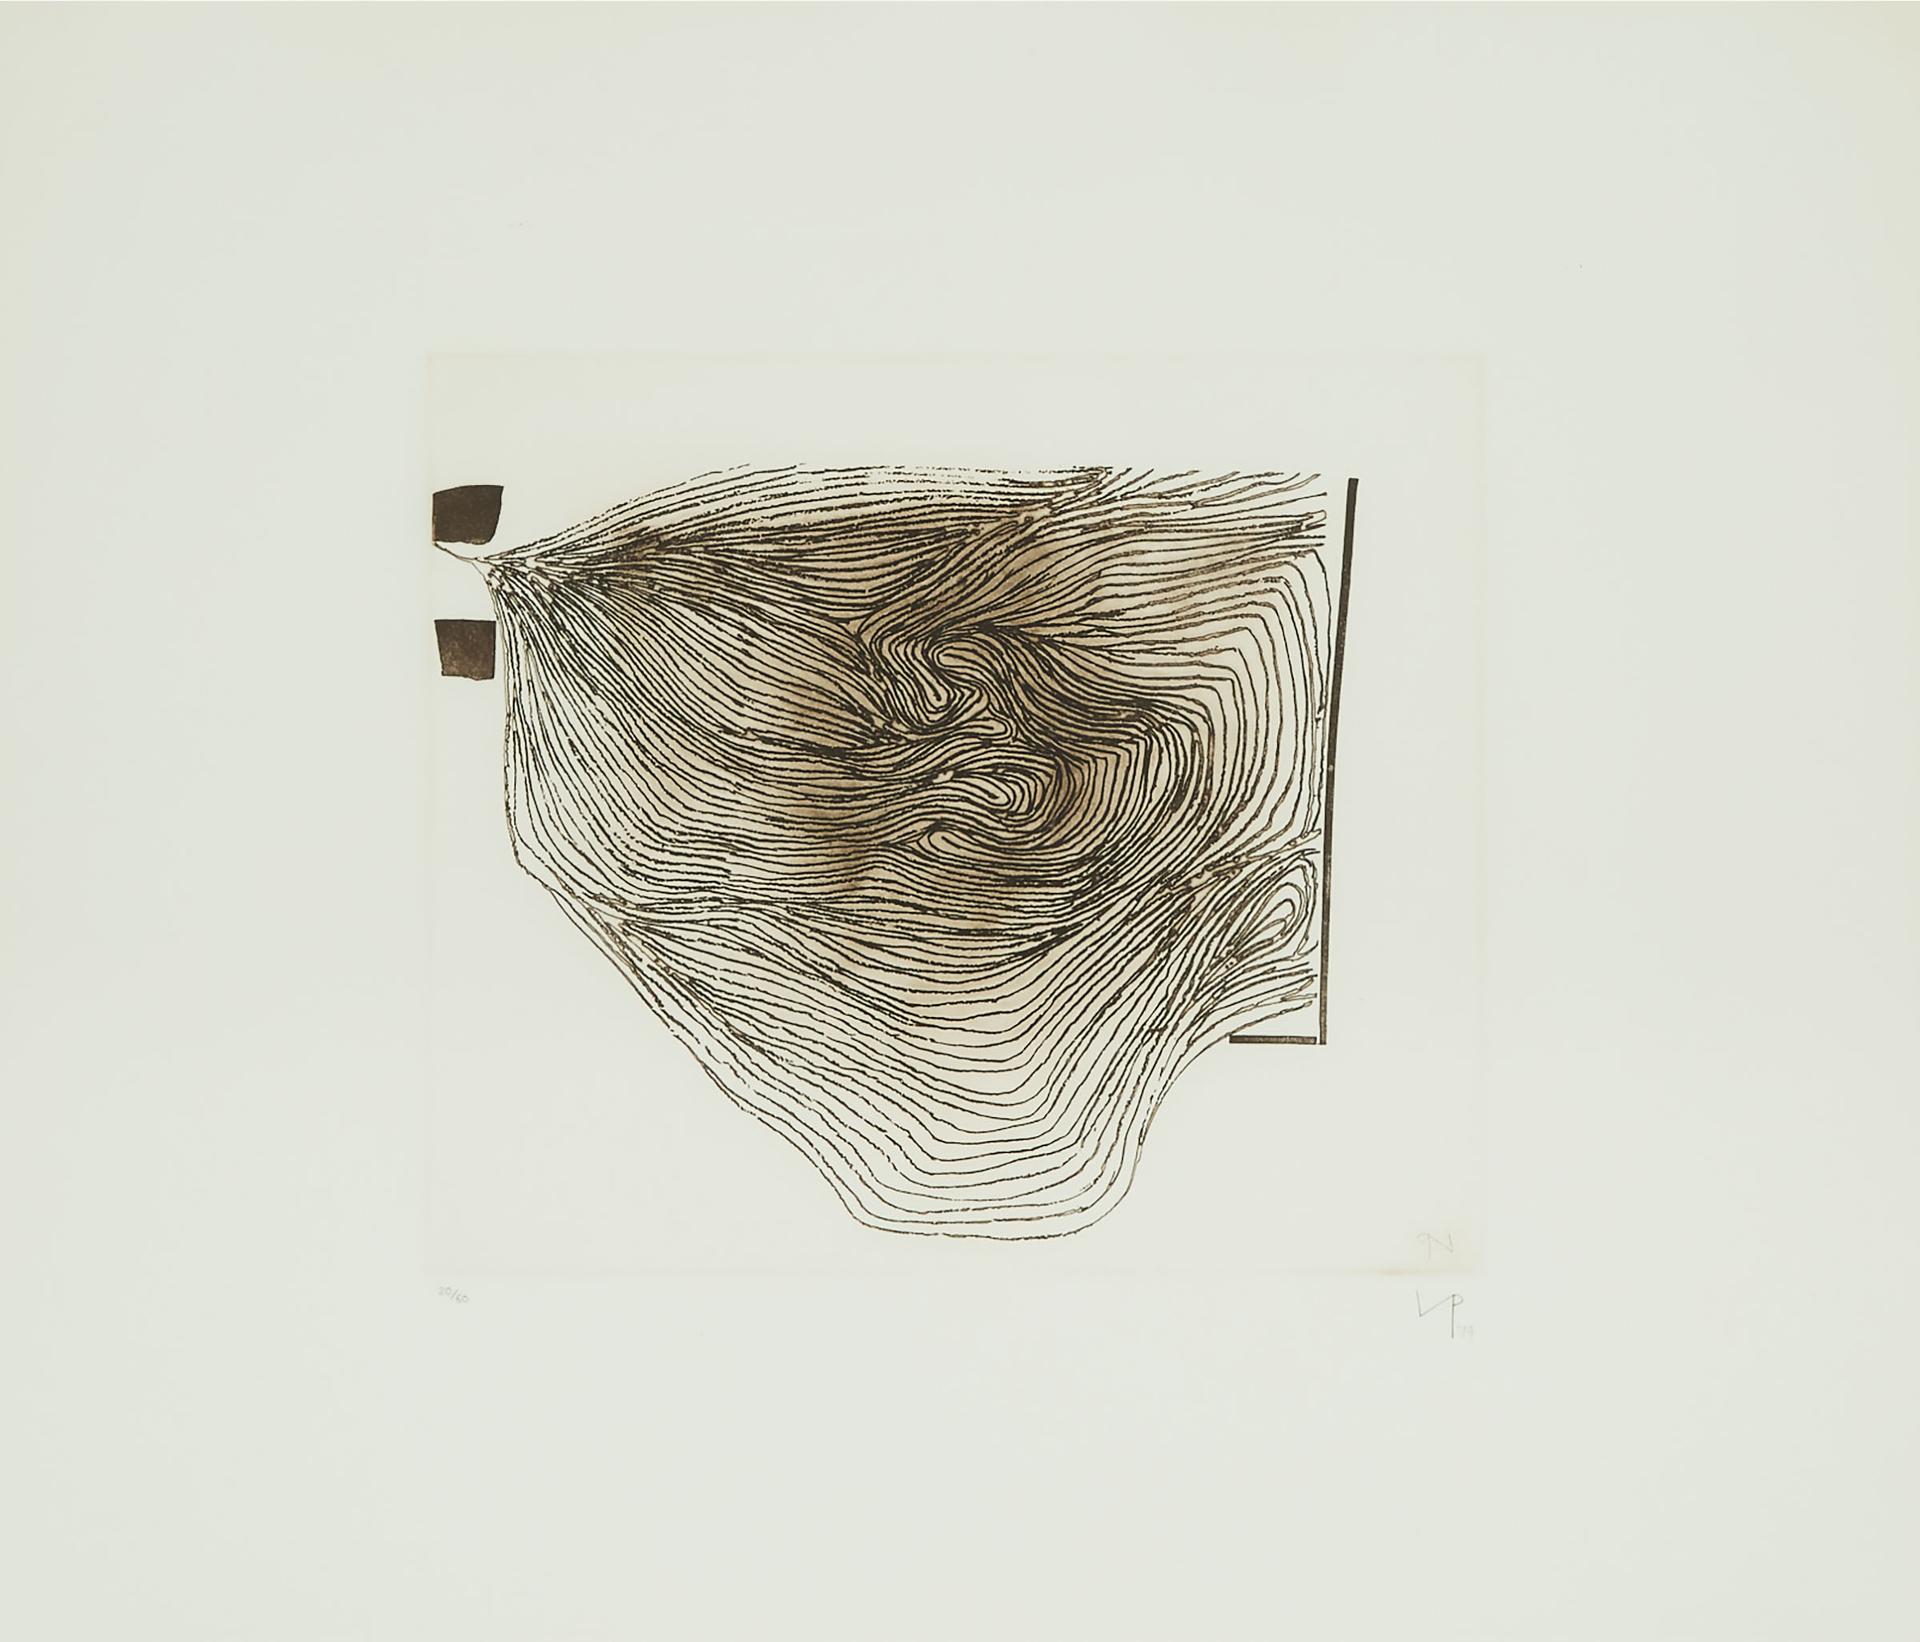 Victor Pasmore (1908-1998) - Linear Development In One Movement, 1974